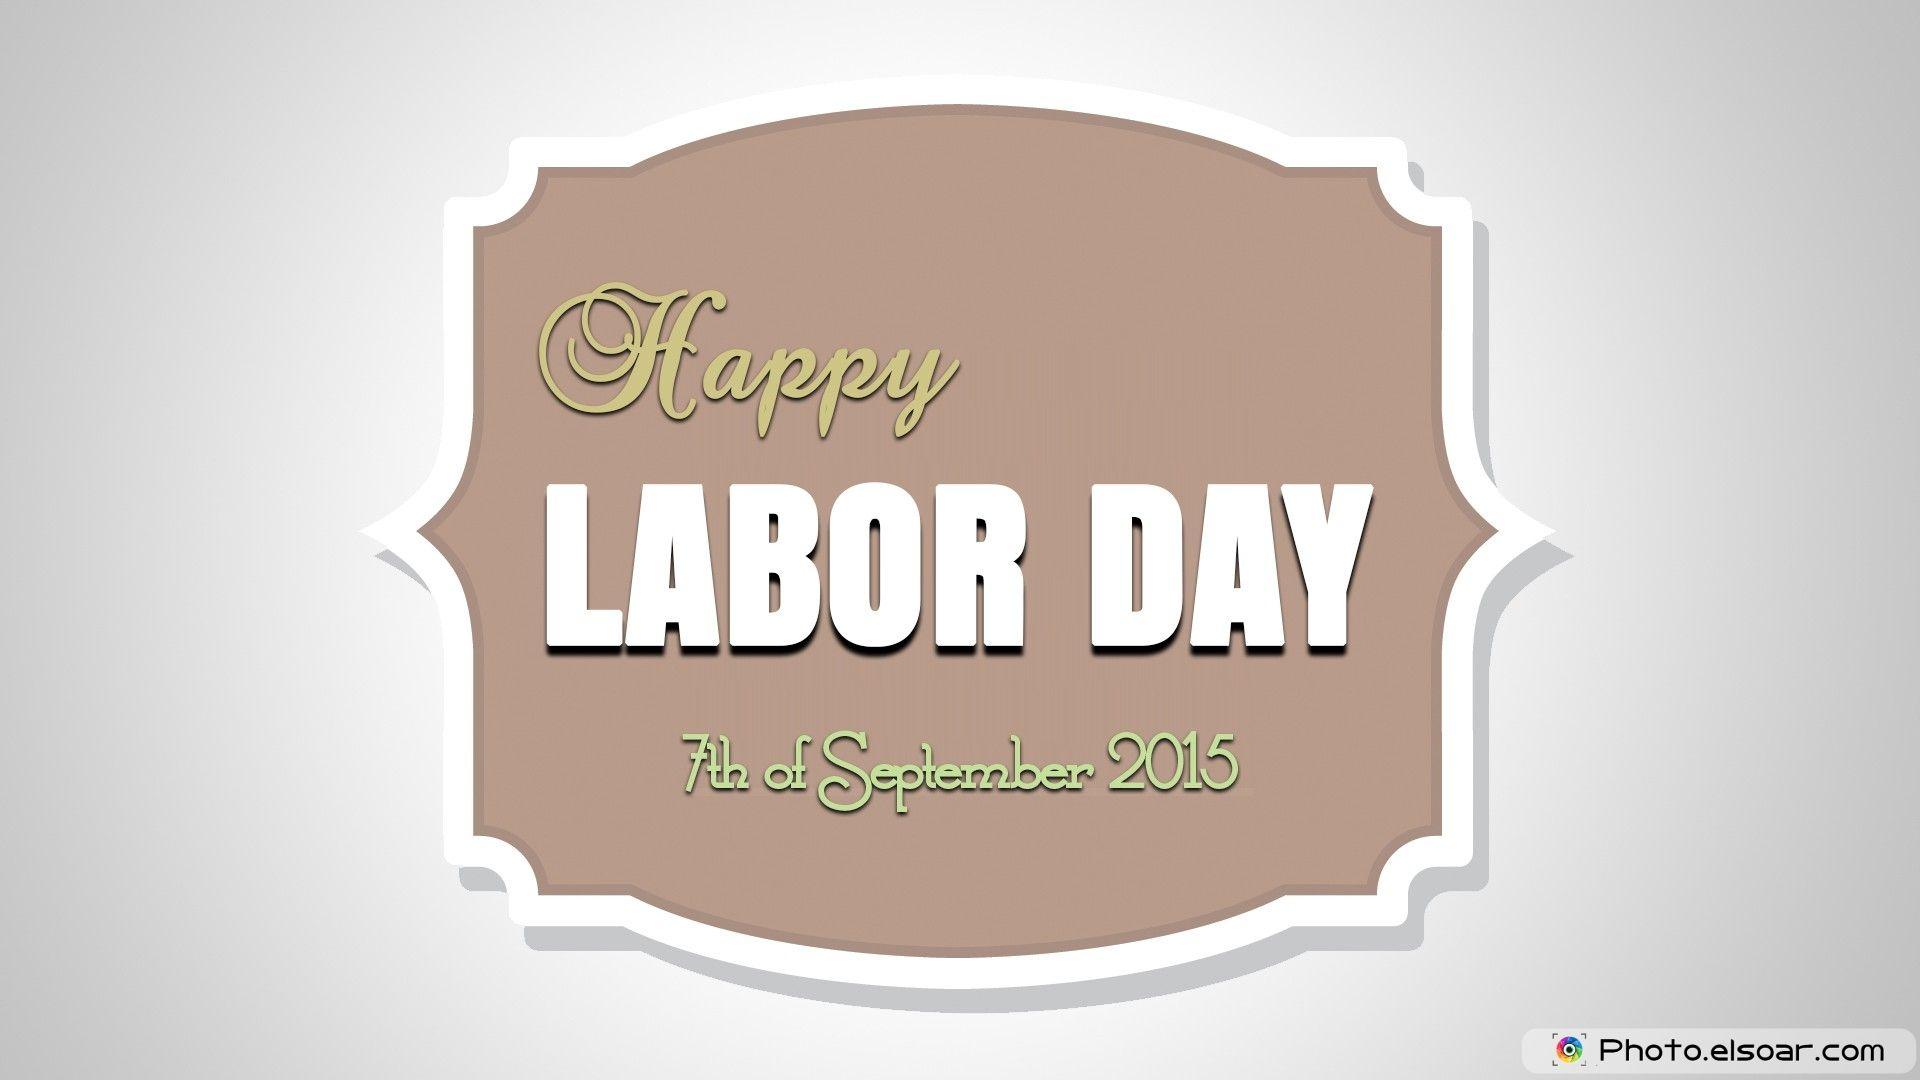 Happy Labor Day 2015! 7th of September